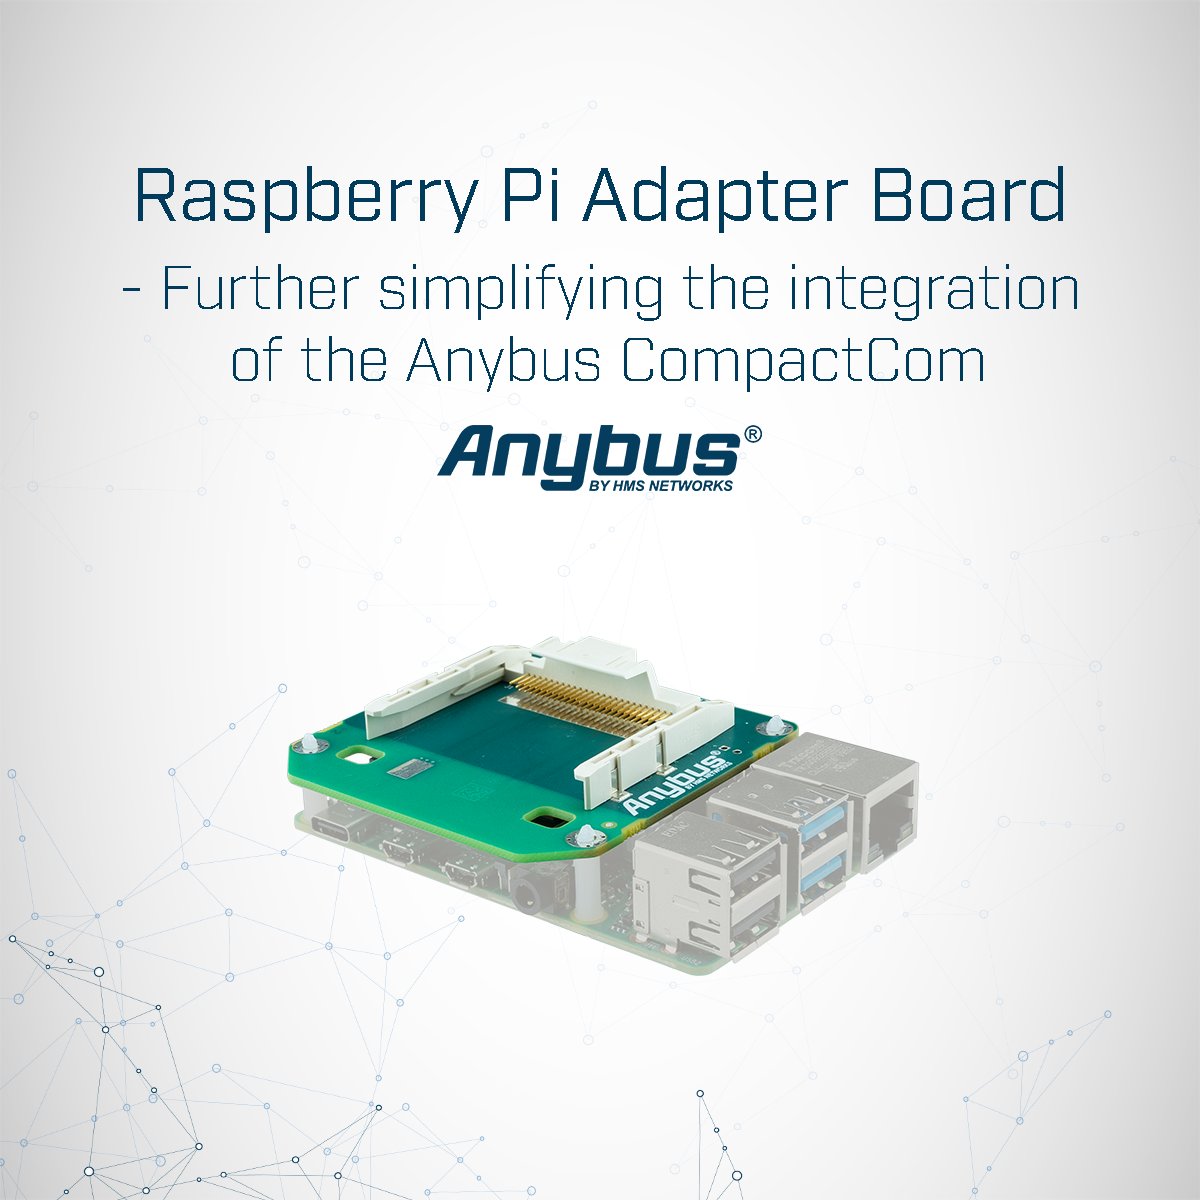 Exciting News👏Introducing the Raspberry Pi Adapter Board from HMS Networks – your key to simplified integration with Anybus CompactCom! For more information, or to order your Raspberry Pi Adapter Board, visit: anybus.com/about-us/news/… #Anybus #RaspberryPi #industrialautomation